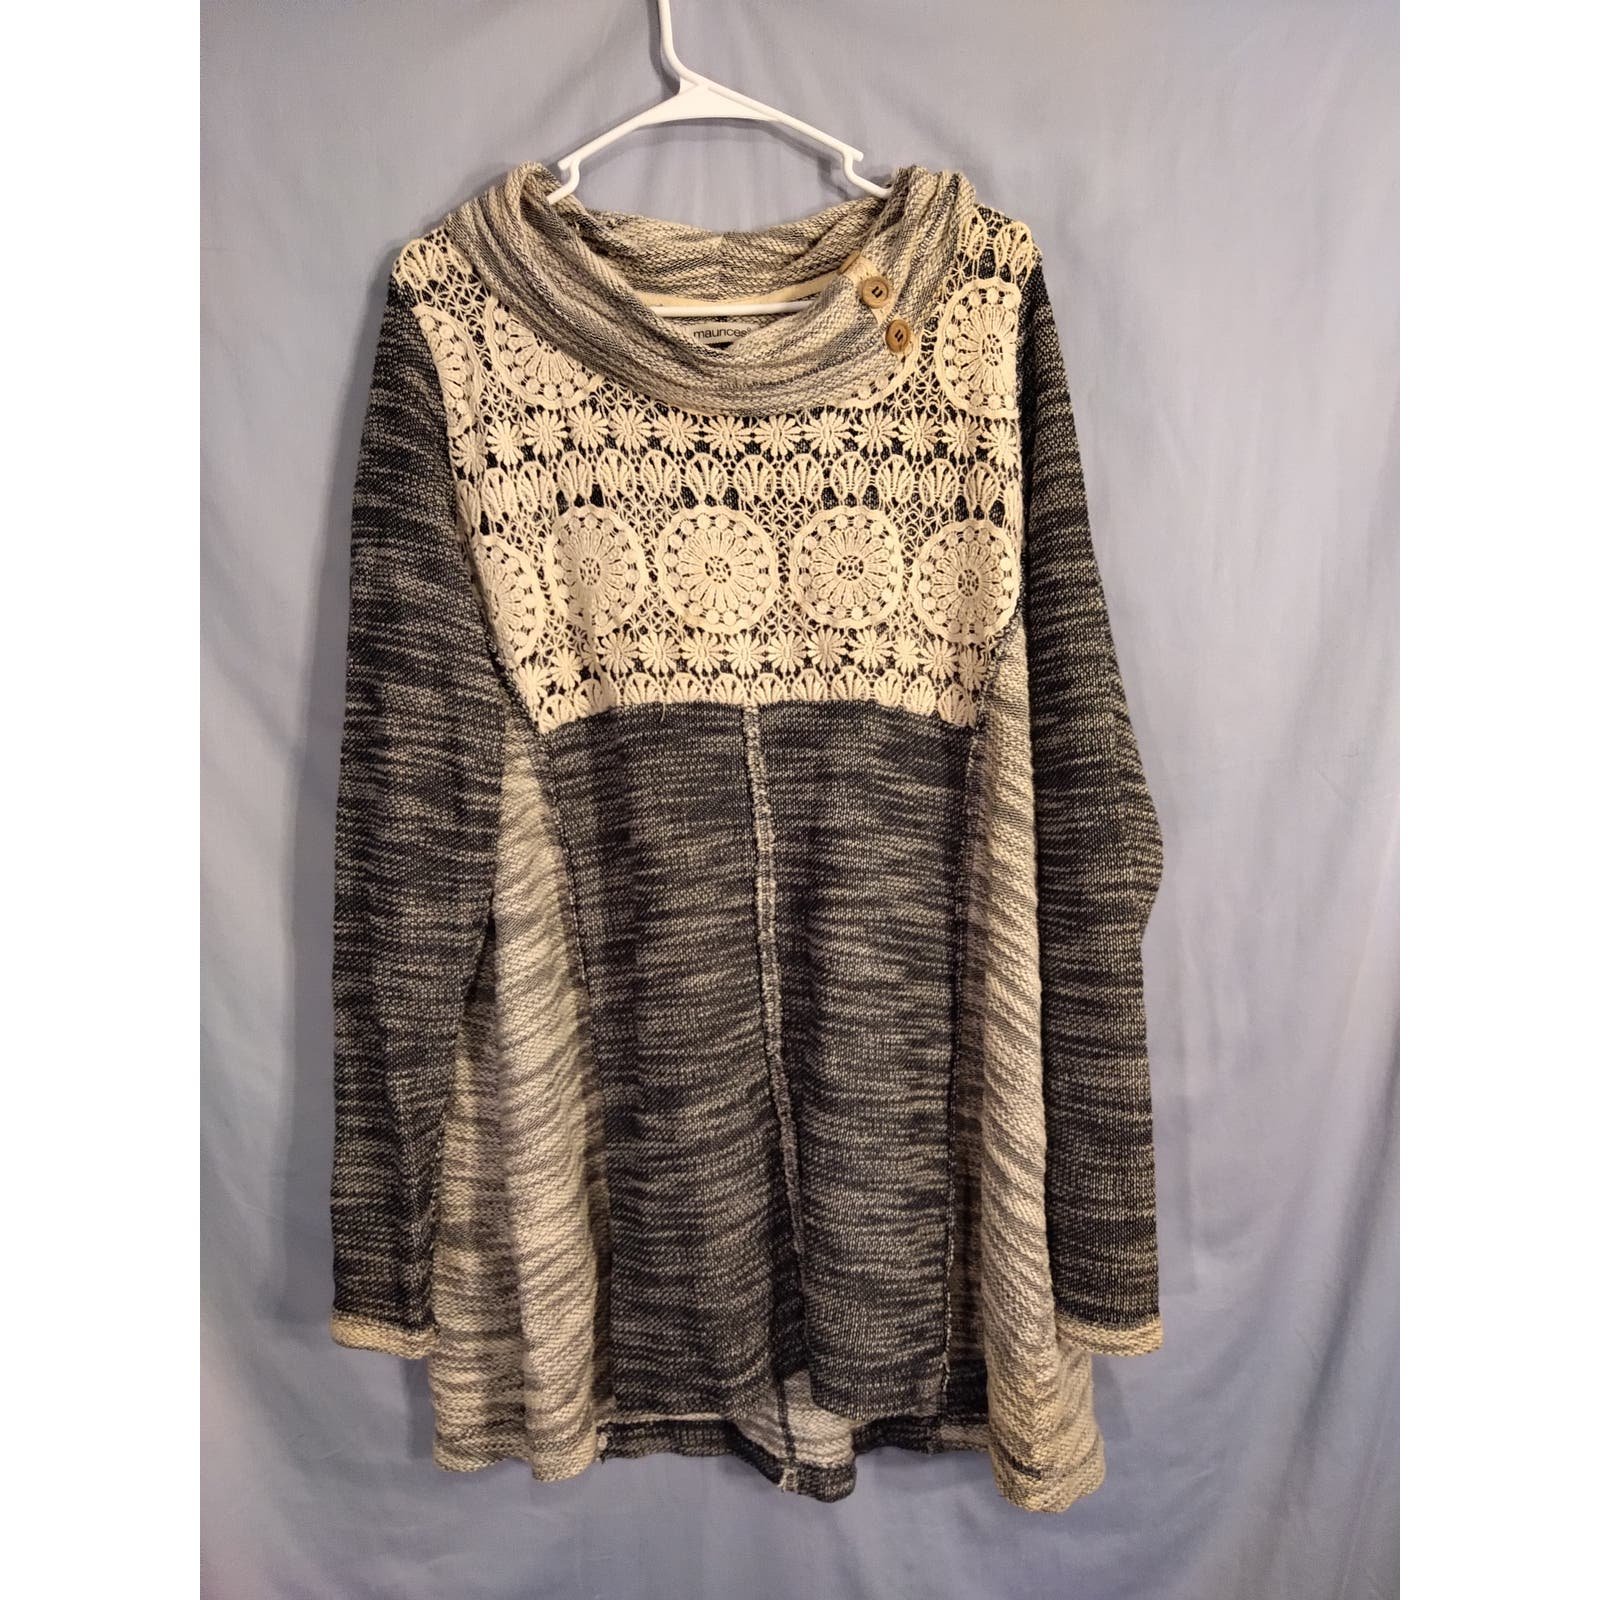 where to buy  Maurices Gray and White Heavy Knit Tunic Top lwCkUSmQE Online Exclusive